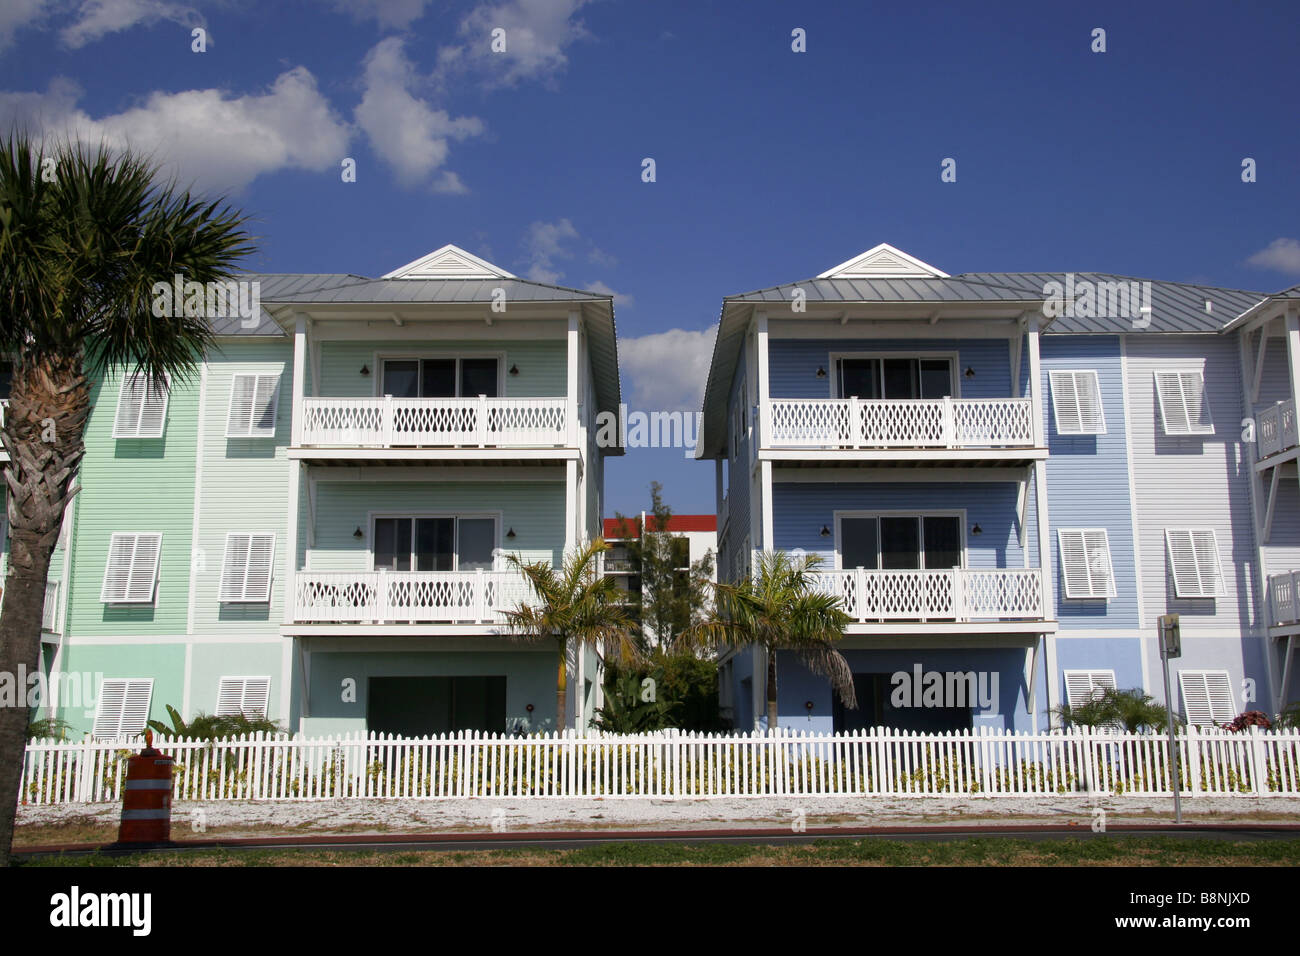 Apartments in Indian Shores between Clearwater Beach and St Pe